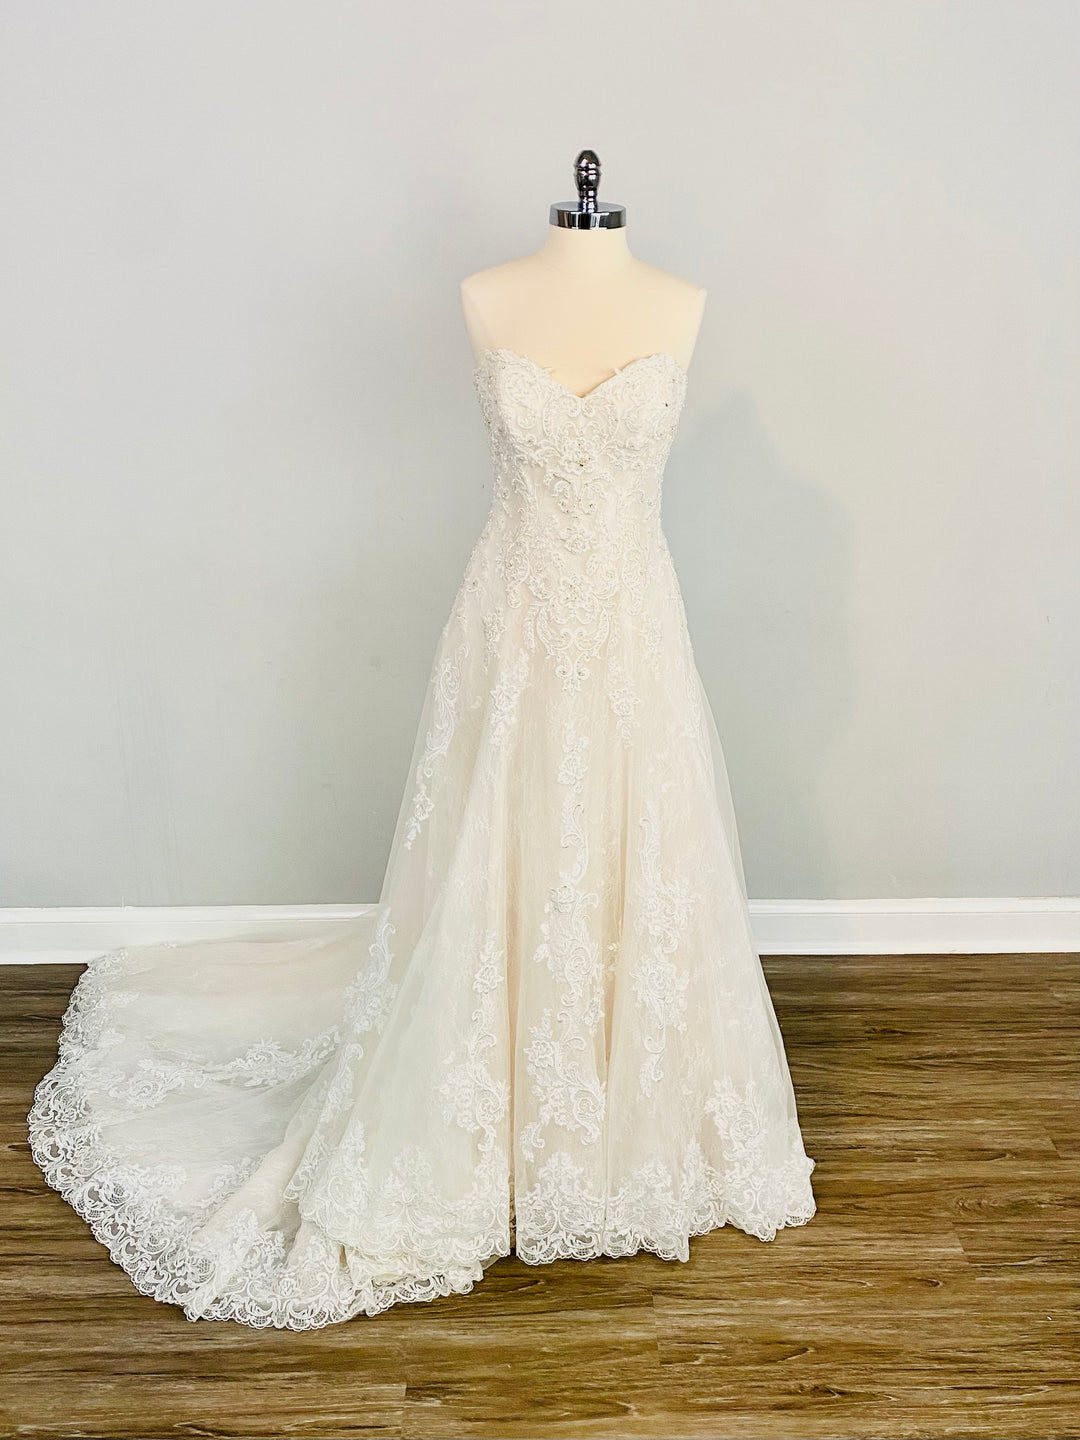 The "Gail" Gown by Maggie Sottero Size 14